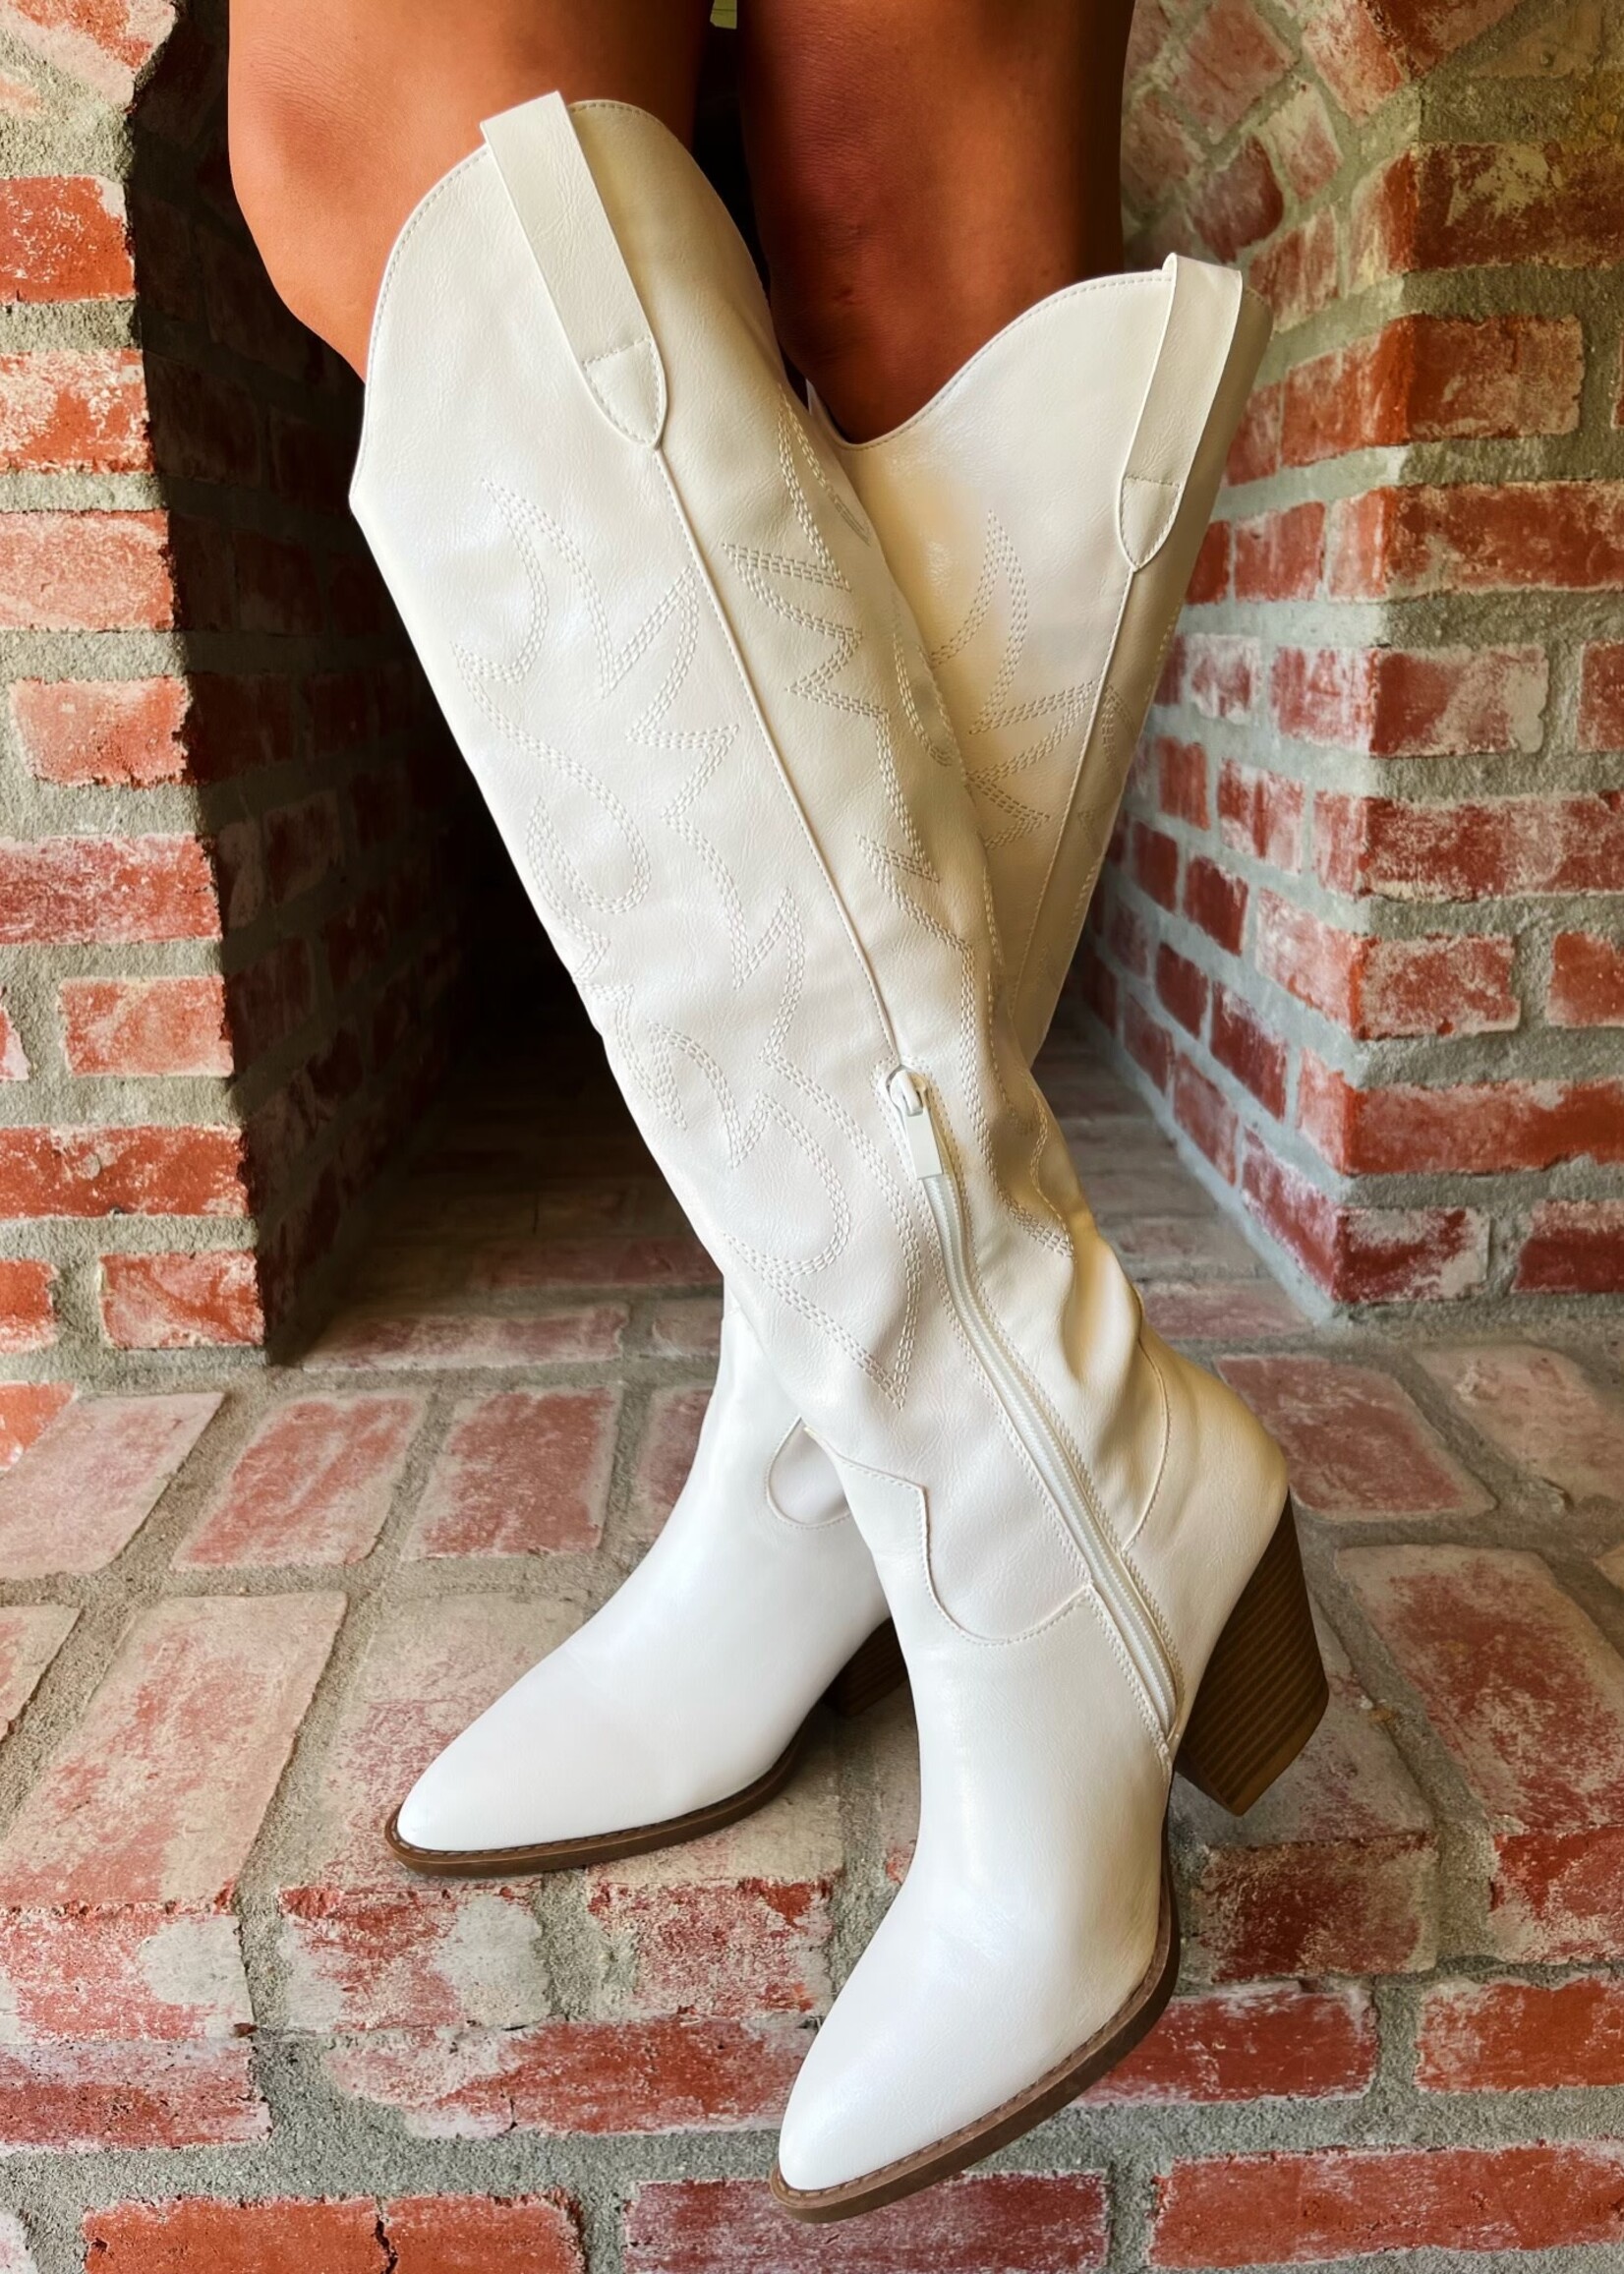 Bloom and Company White Knee High Cowboy Boots